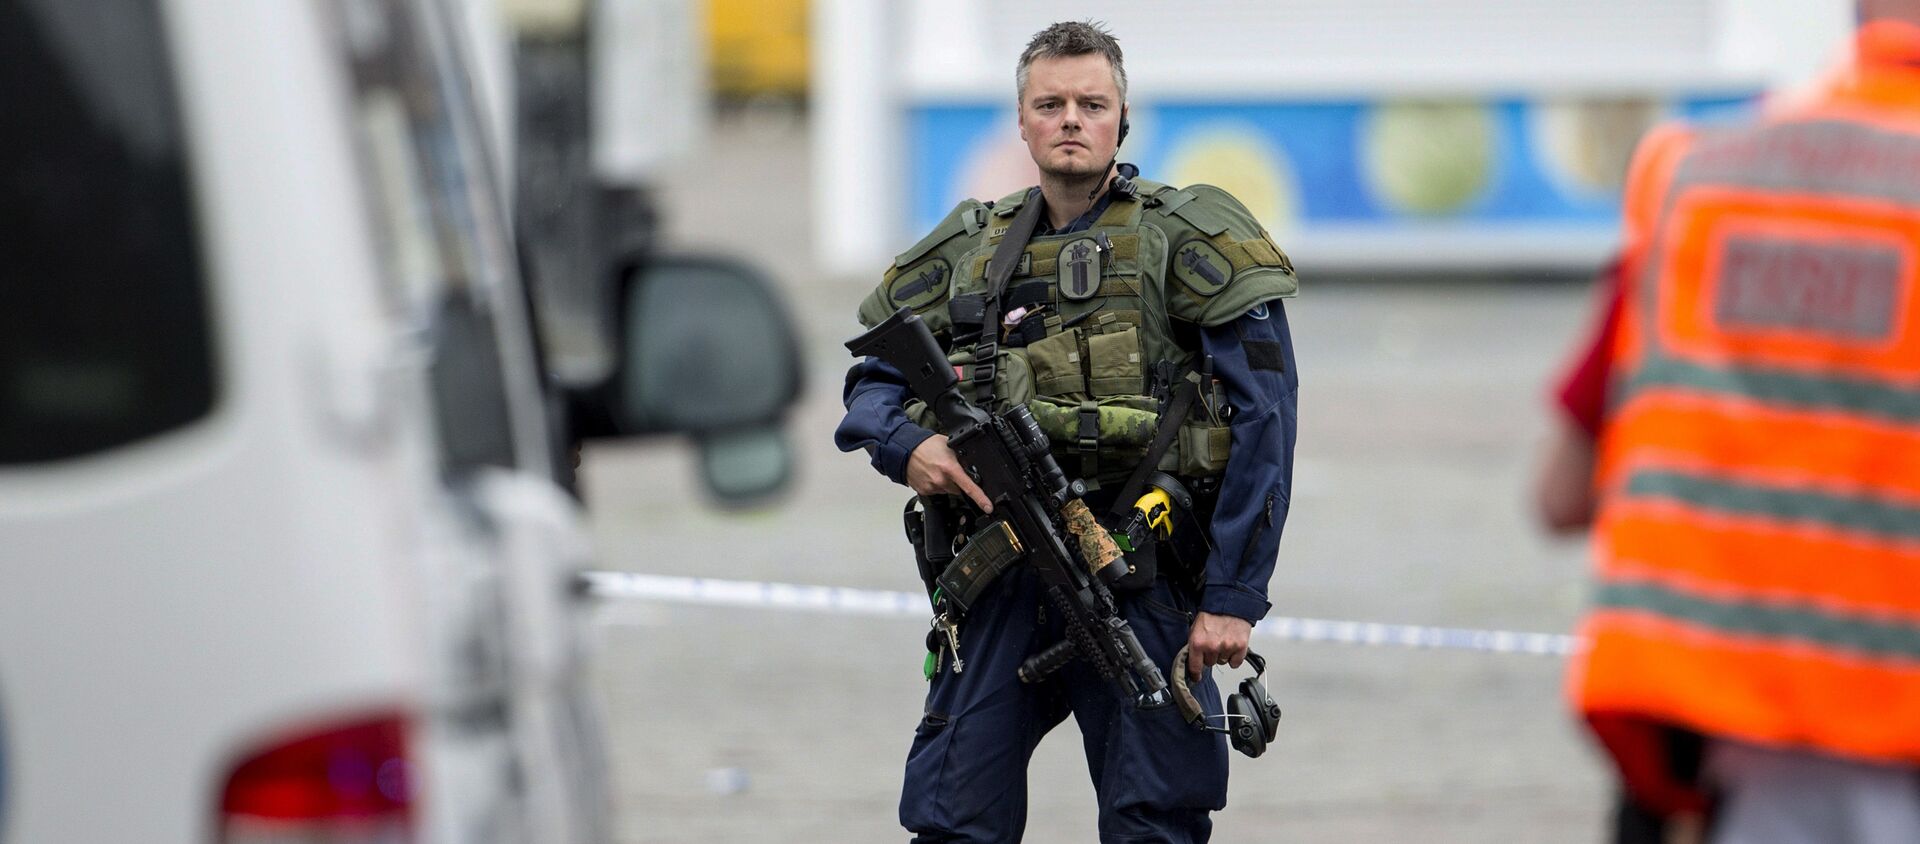 An armed police officer secures the area following a multiple stabbing attack on the Market Square in Turku, Finland, Friday Aug. 18, 2017 - Sputnik International, 1920, 01.04.2019